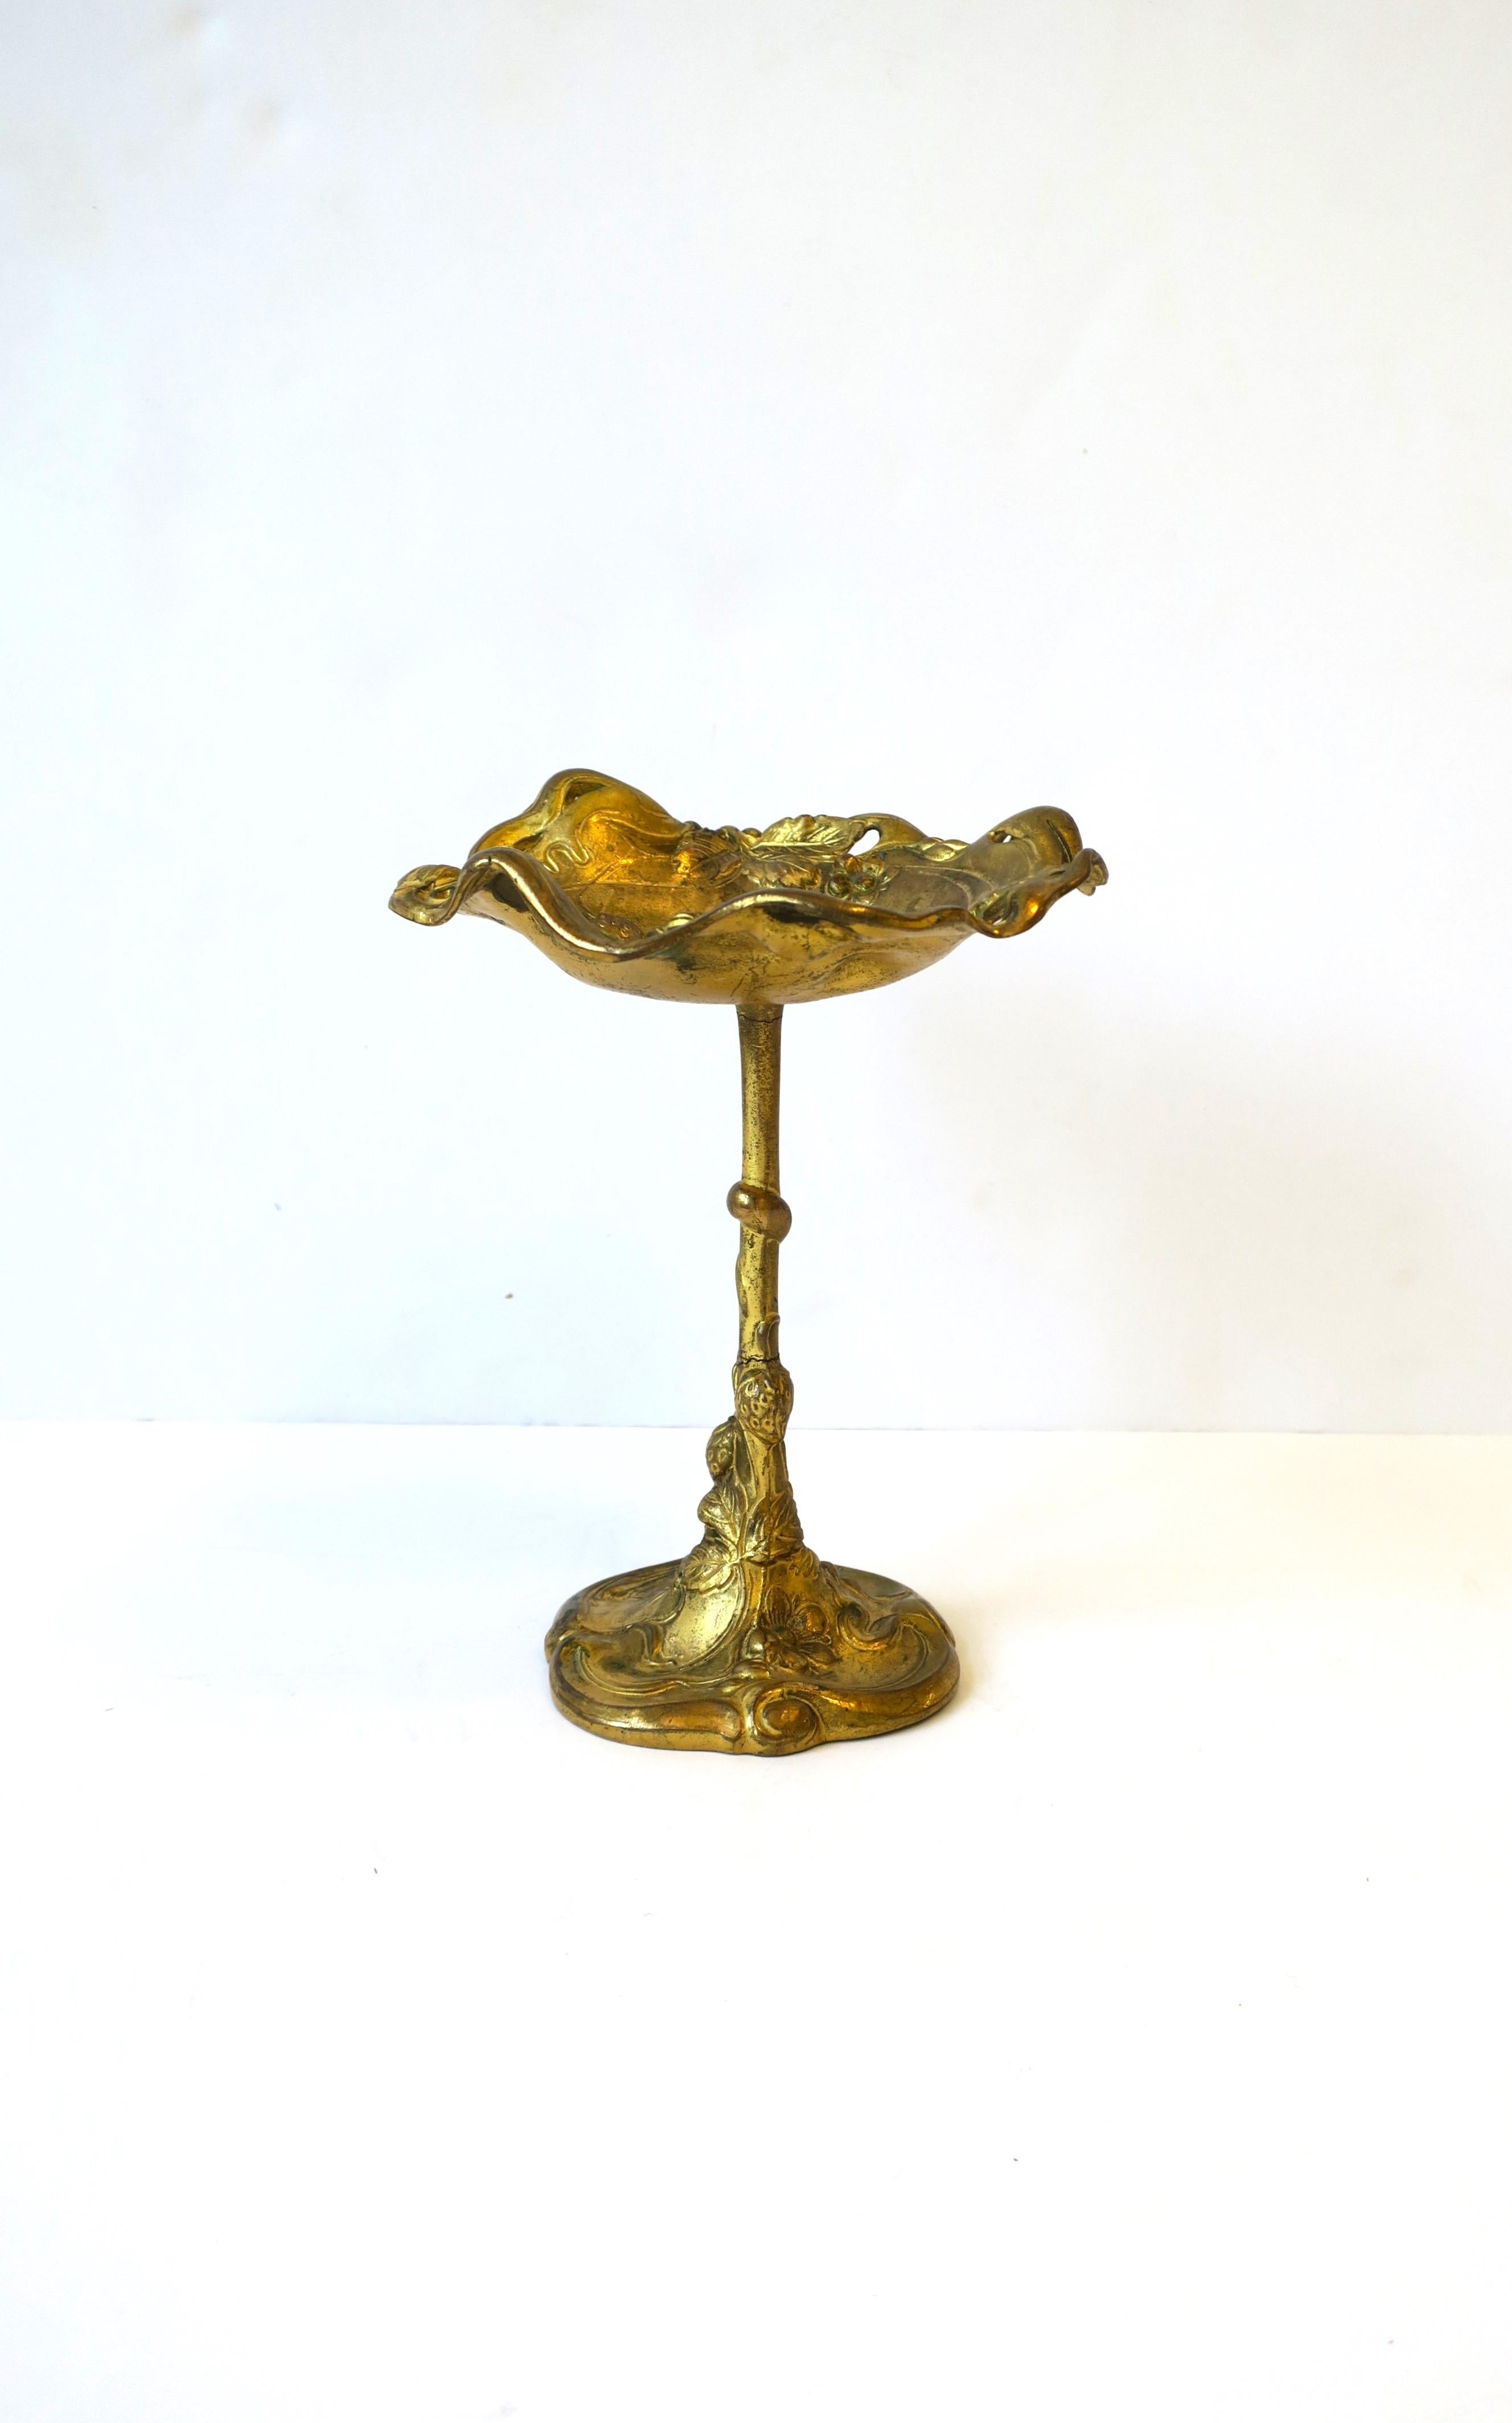 A gold gilt bronze compote or tazza in the Art Nouveau style, circa early 20th century. Piece is decorated with a raised relief of strawberry fruit, vines, leaves and flowers. Dimensions: 7.5